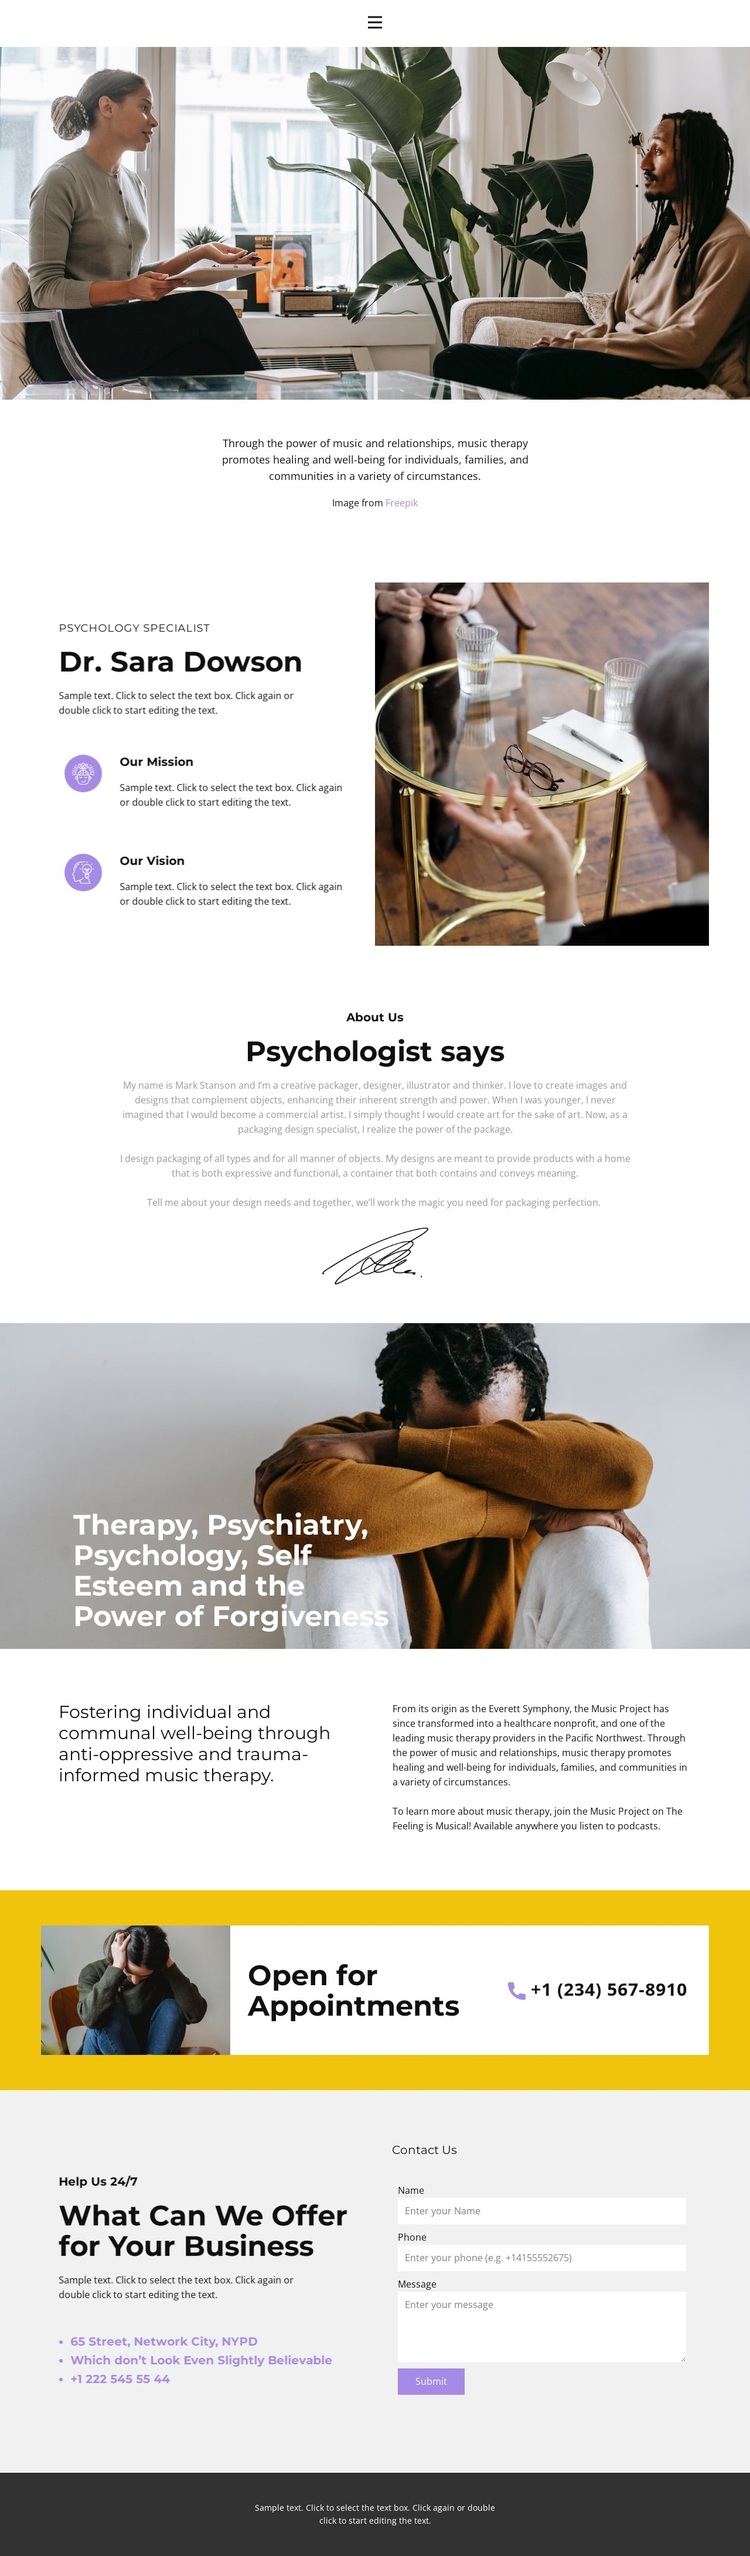 Qualified help from a psychologist Template